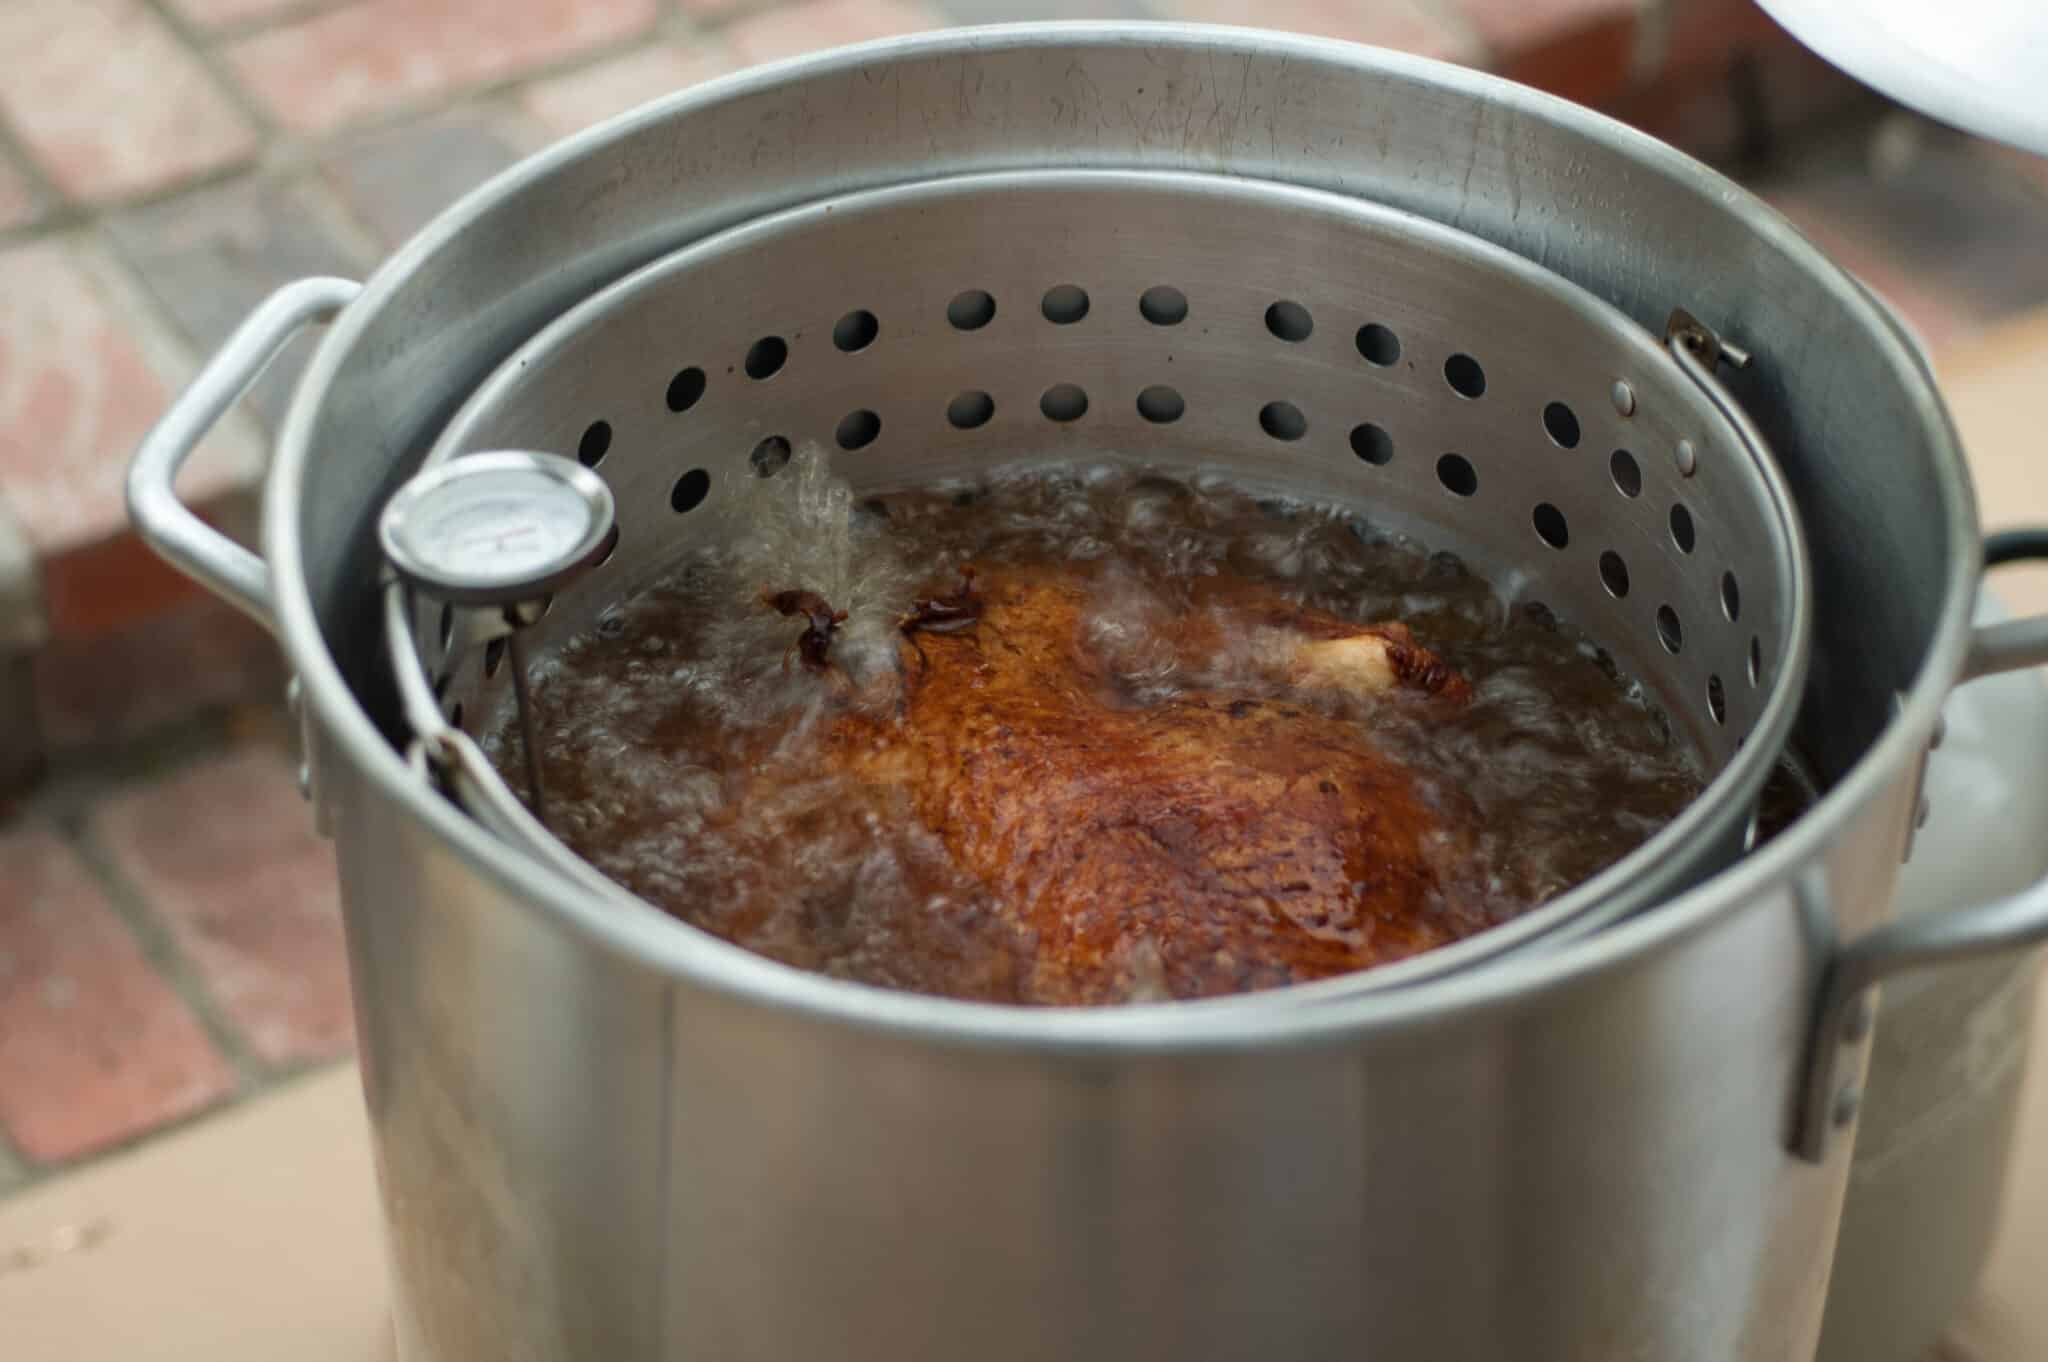 How to fry a turkey safely on Thanksgiving